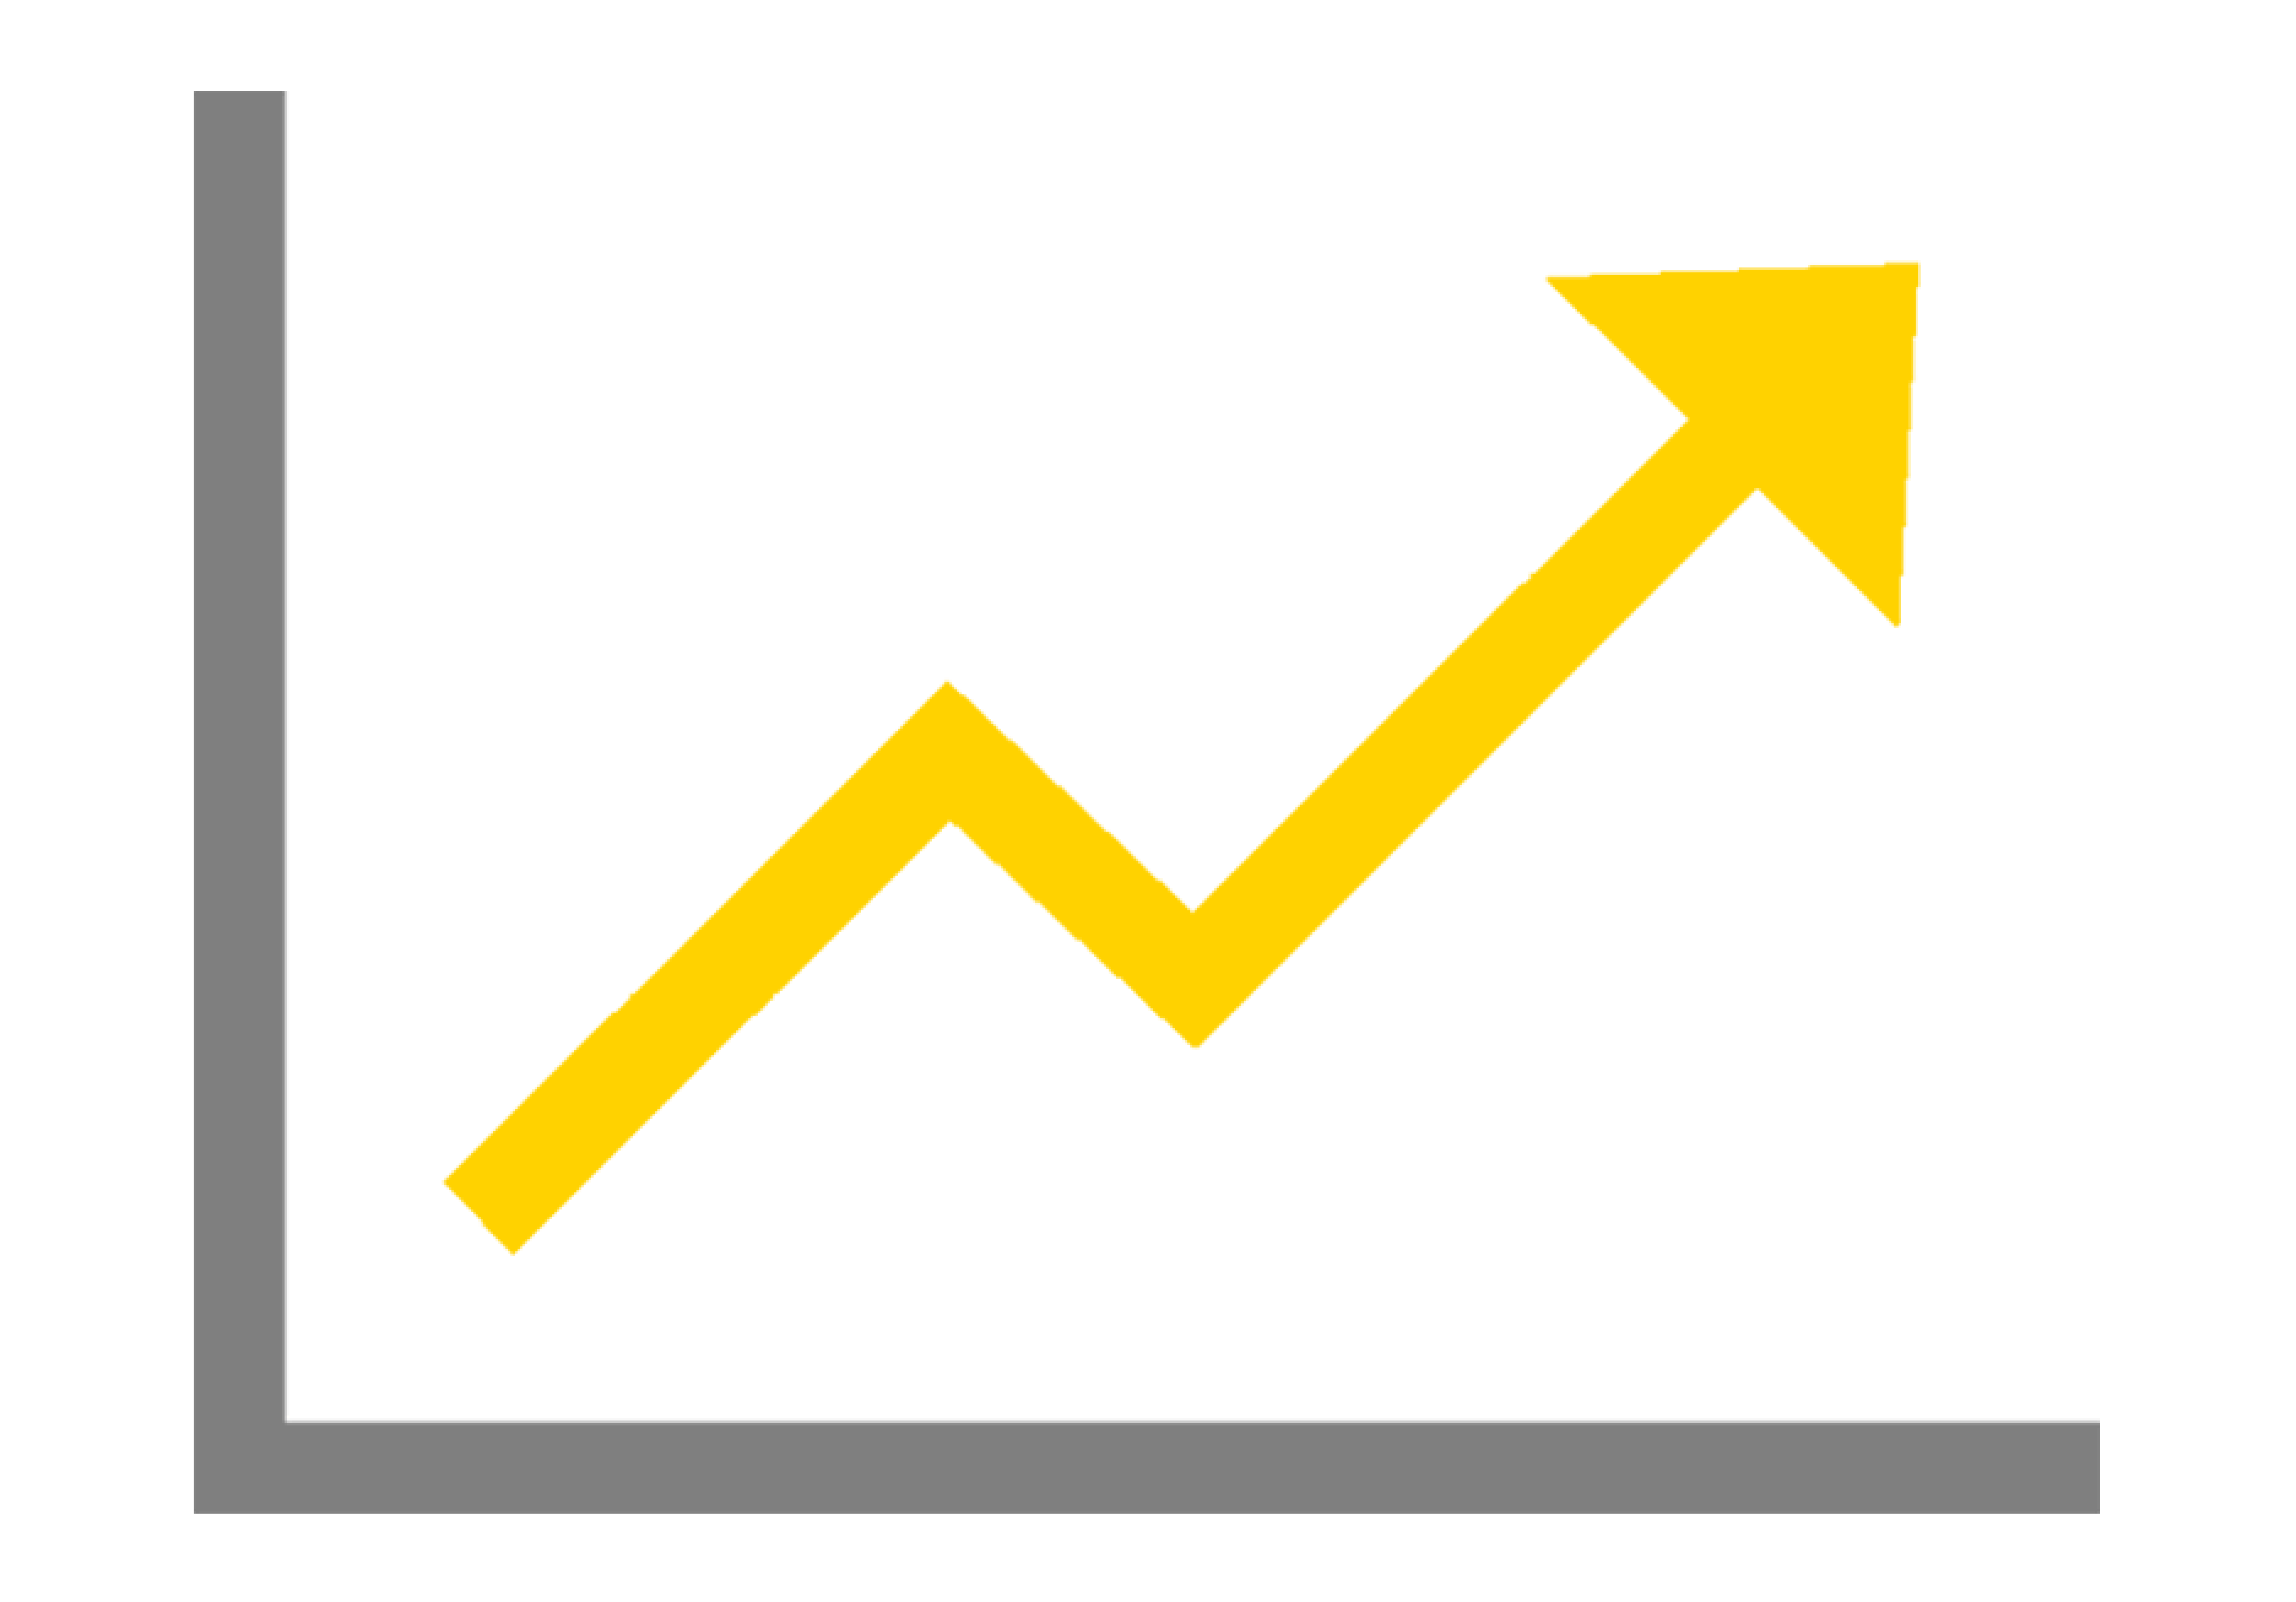 An Icon of a mounting stock price arrow in yellow.